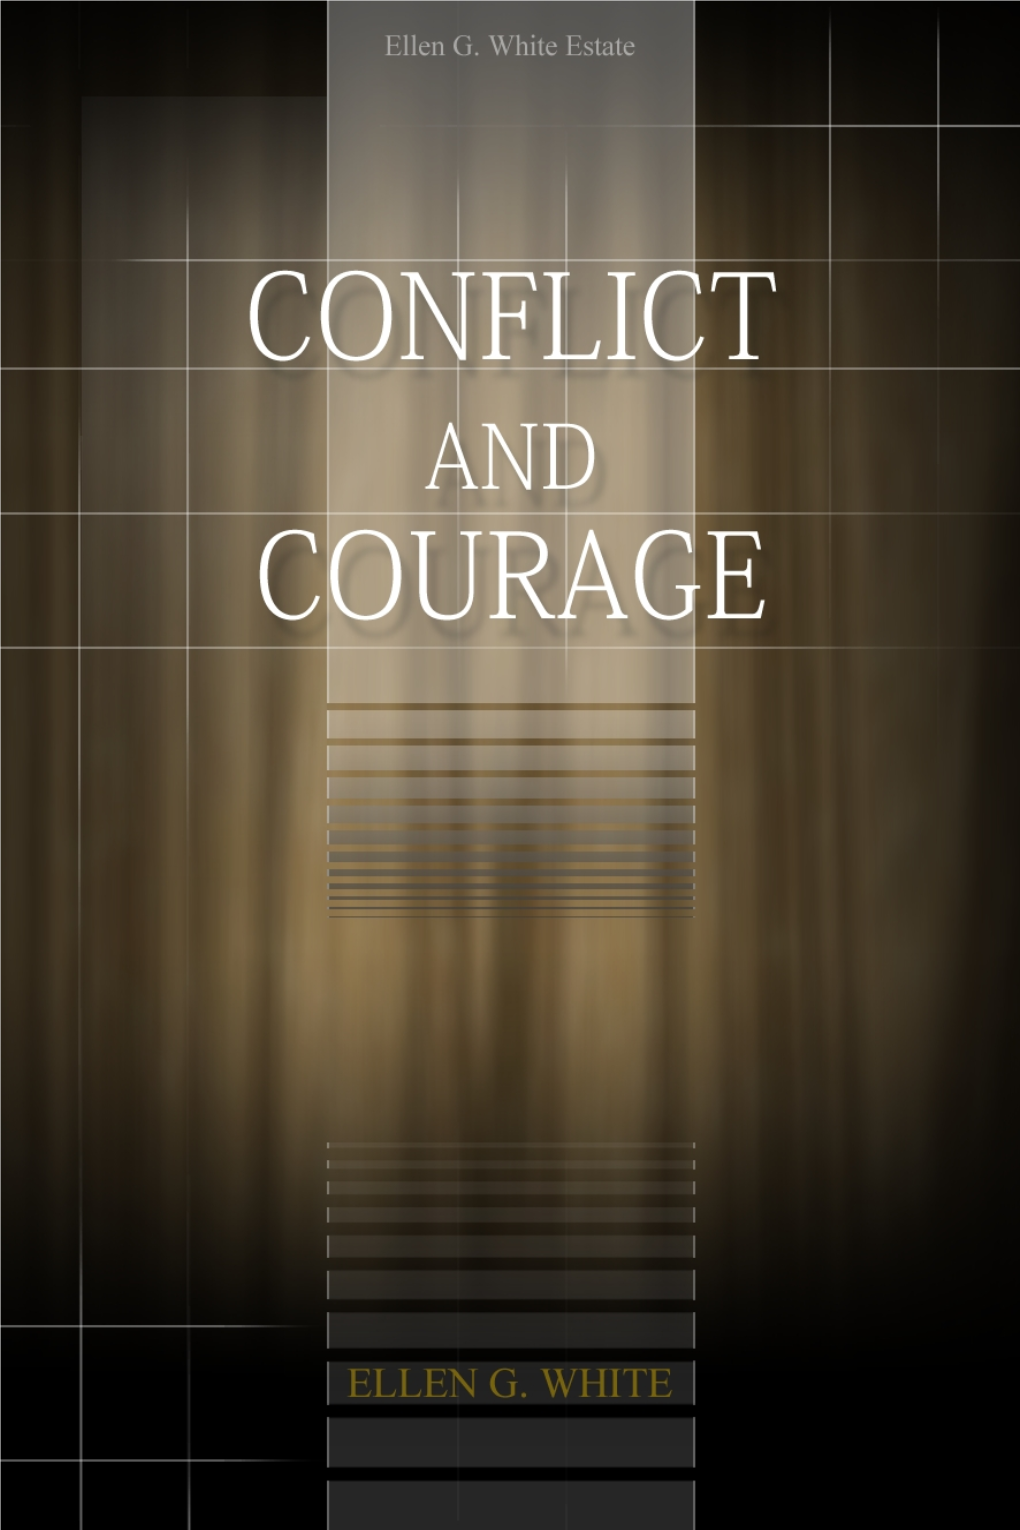 Conflict and Courage.Pdf